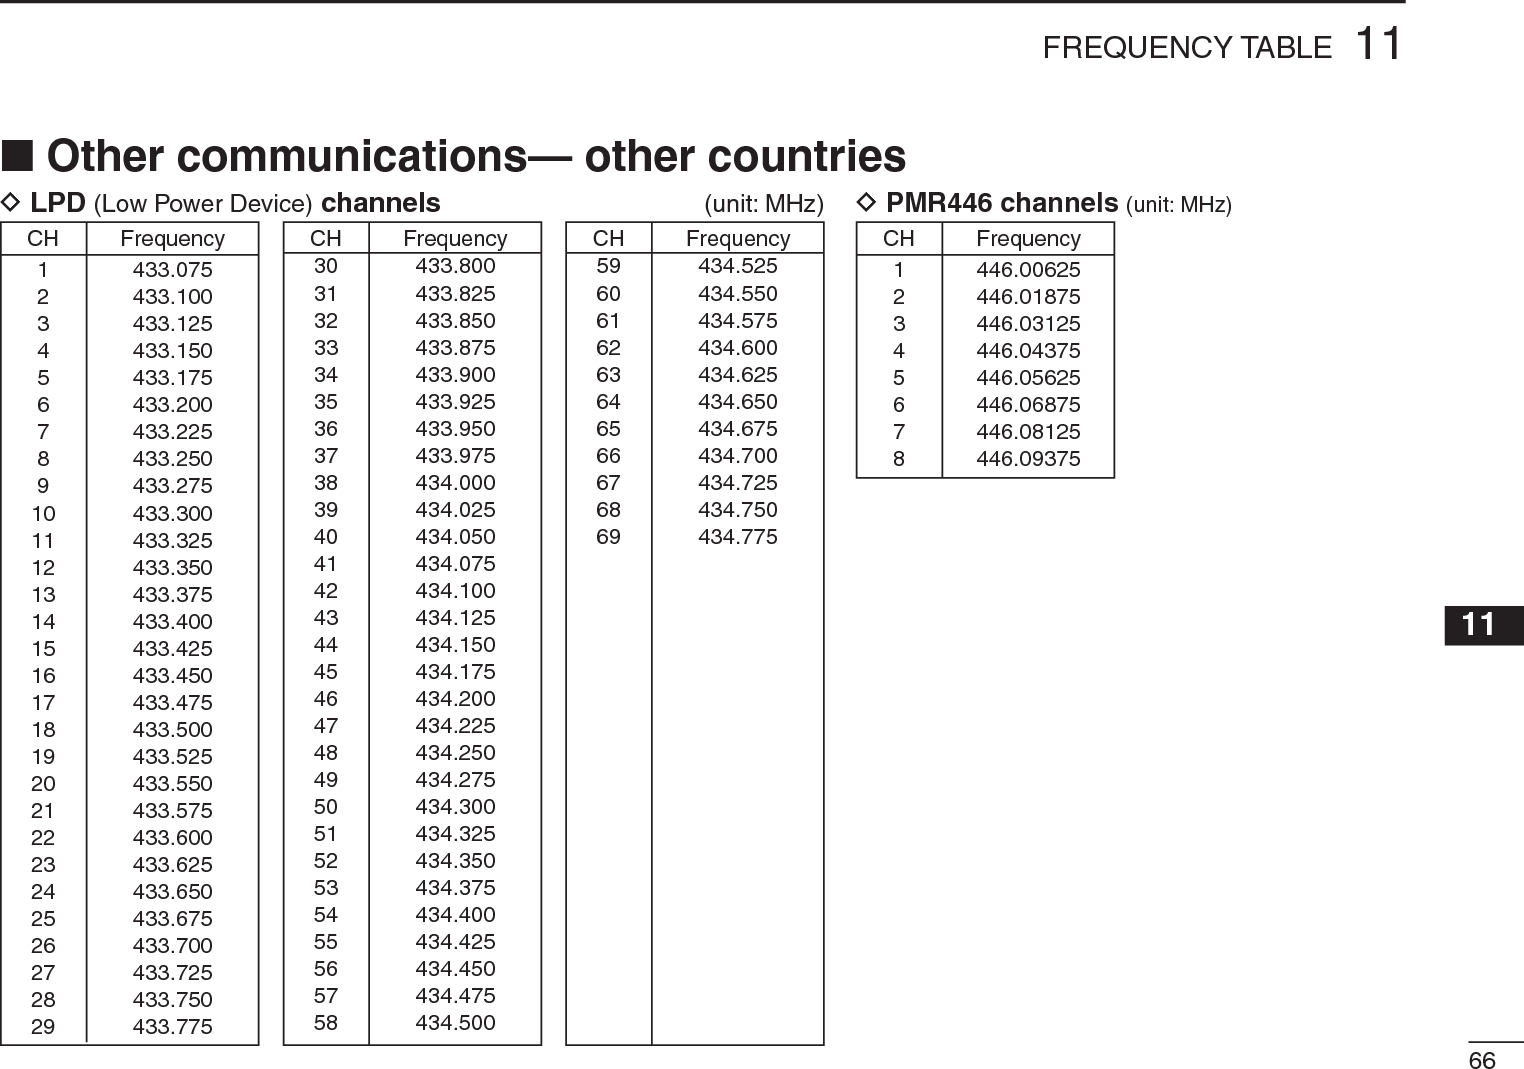 6611FREQUENCY TABLE11N Other communications— other countriesCH Frequency1 446.006252 446.018753 446.031254 446.043755 446.056256 446.068757 446.081258 446.09375DPMR446 channels(unit: MHz)CH Frequency59 434.52560 434.55061 434.57562 434.60063 434.62564 434.65065 434.67566 434.70067 434.72568 434.75069 434.775CH Frequency1 433.0752 433.1003 433.1254 433.1505 433.1756 433.2007 433.2258 433.2509 433.27510 433.30011 433.32512 433.35013 433.37514 433.40015 433.42516 433.45017 433.47518 433.50019 433.52520 433.55021 433.57522 433.60023 433.62524 433.65025 433.67526 433.70027 433.72528 433.75029 433.775D LPD (Low Power Device) channels (unit: MHz)CH Frequency30 433.80031 433.82532 433.85033 433.87534 433.90035 433.92536 433.95037 433.97538 434.00039 434.02540 434.05041 434.07542 434.10043 434.12544 434.15045 434.17546 434.20047 434.22548 434.25049 434.27550 434.30051 434.32552 434.35053 434.37554 434.40055 434.42556 434.45057 434.47558 434.500